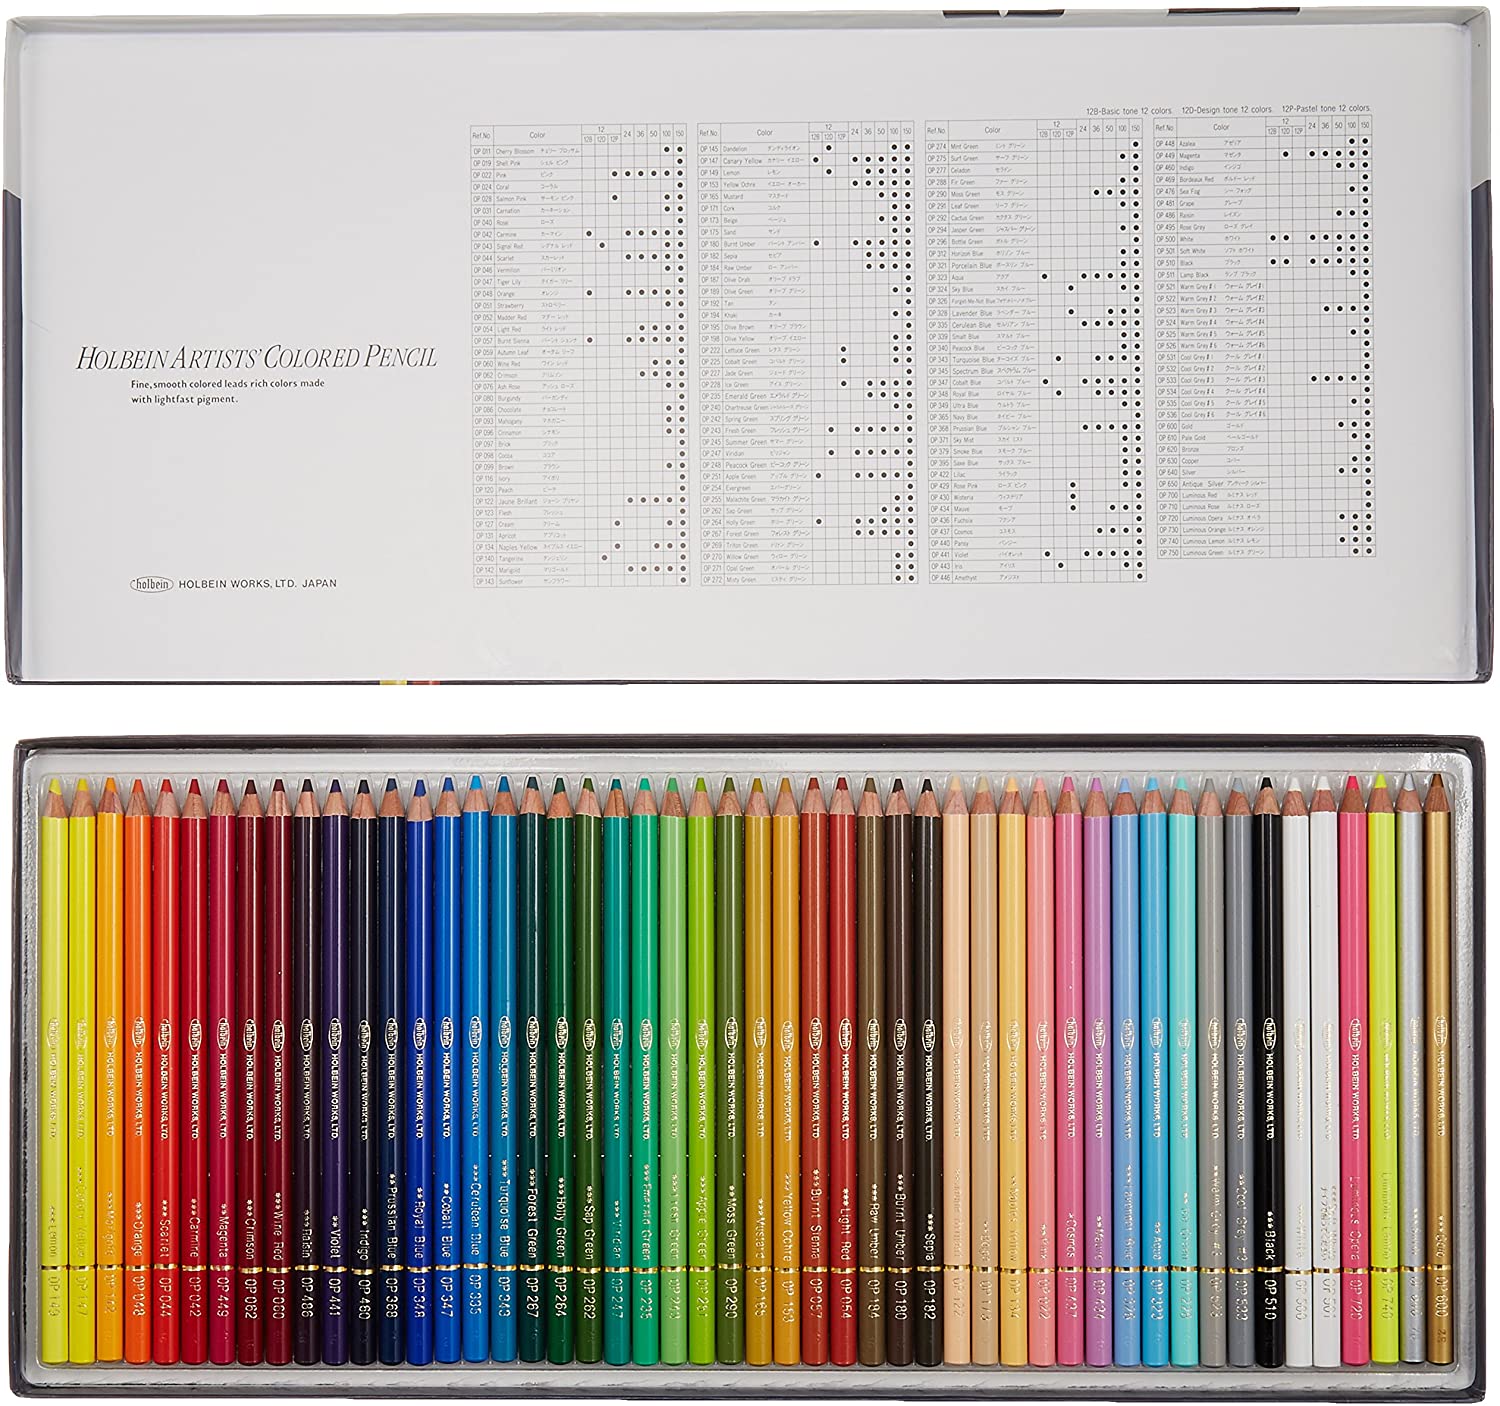 Holbein : Artists' Coloured Pencil : Basic Tone Set of 50 - Colored Pencils  - Pencil & Drawing - Color